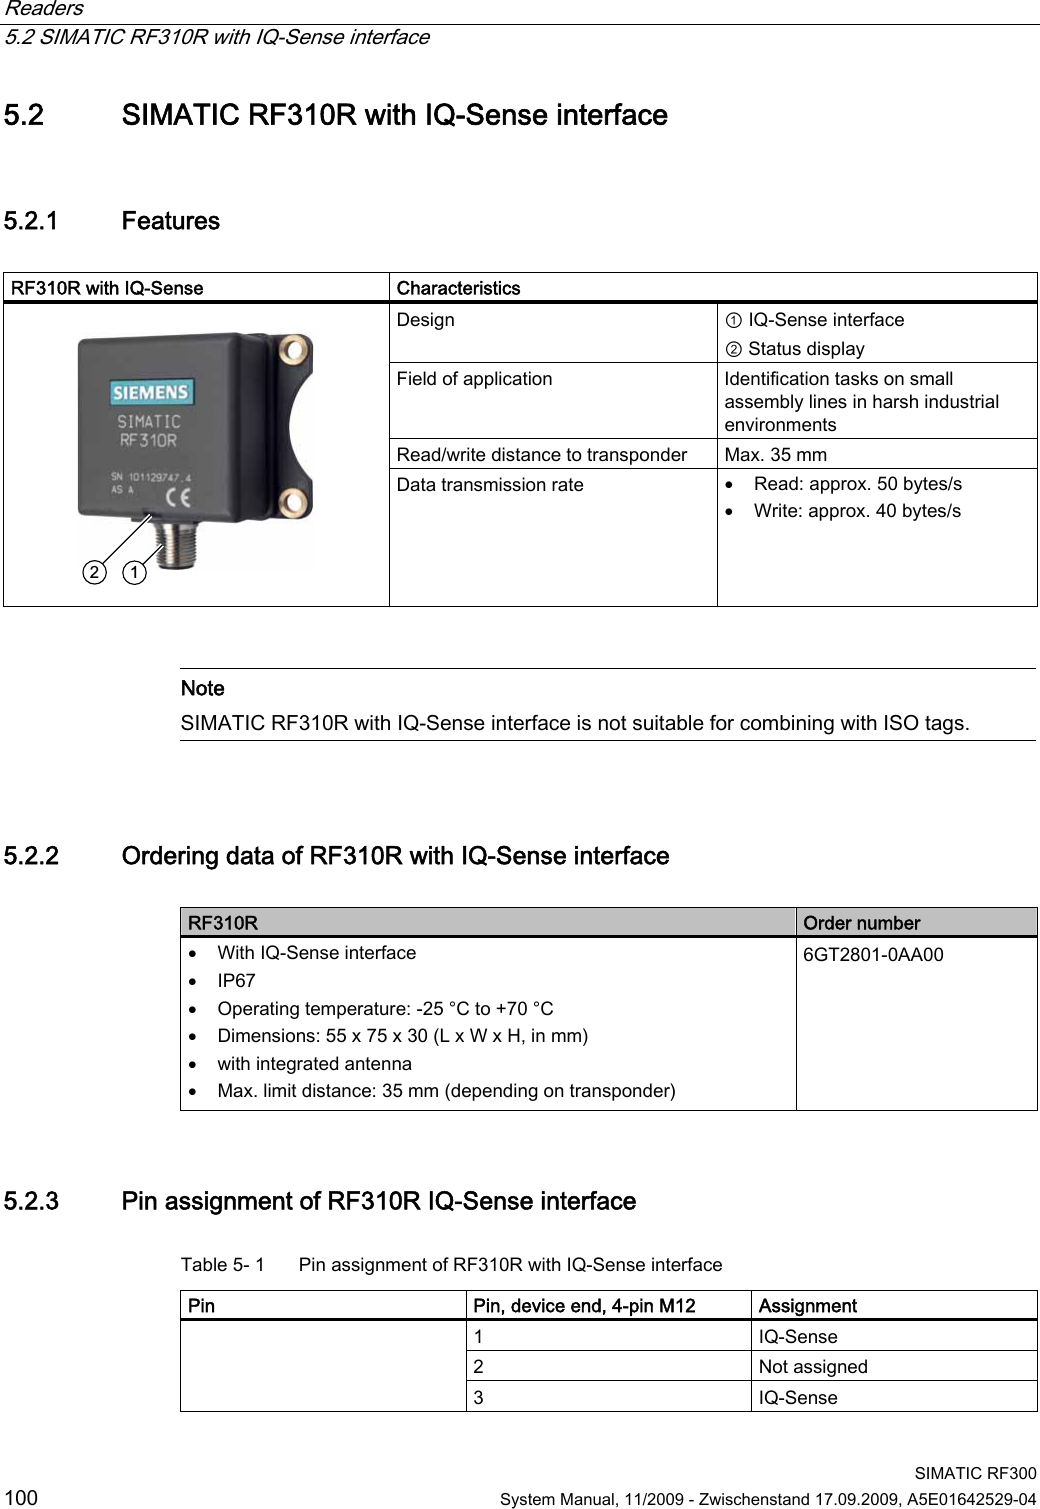 Readers   5.2 SIMATIC RF310R with IQ-Sense interface  SIMATIC RF300 100  System Manual, 11/2009 - Zwischenstand 17.09.2009, A5E01642529-04 5.2 SIMATIC RF310R with IQ-Sense interface 5.2.1 Features  RF310R with IQ-Sense   Characteristics Design  ① IQ-Sense interface ② Status display Field of application  Identification tasks on small assembly lines in harsh industrial environments Read/write distance to transponder  Max. 35 mm    Data transmission rate   Read: approx. 50 bytes/s  Write: approx. 40 bytes/s    Note SIMATIC RF310R with IQ-Sense interface is not suitable for combining with ISO tags.  5.2.2 Ordering data of RF310R with IQ-Sense interface  RF310R  Order number  With IQ-Sense interface  IP67  Operating temperature: -25 °C to +70 °C  Dimensions: 55 x 75 x 30 (L x W x H, in mm)  with integrated antenna  Max. limit distance: 35 mm (depending on transponder) 6GT2801-0AA00  5.2.3 Pin assignment of RF310R IQ-Sense interface Table 5- 1  Pin assignment of RF310R with IQ-Sense interface Pin  Pin, device end, 4-pin M12  Assignment 1  IQ-Sense 2  Not assigned  3  IQ-Sense 